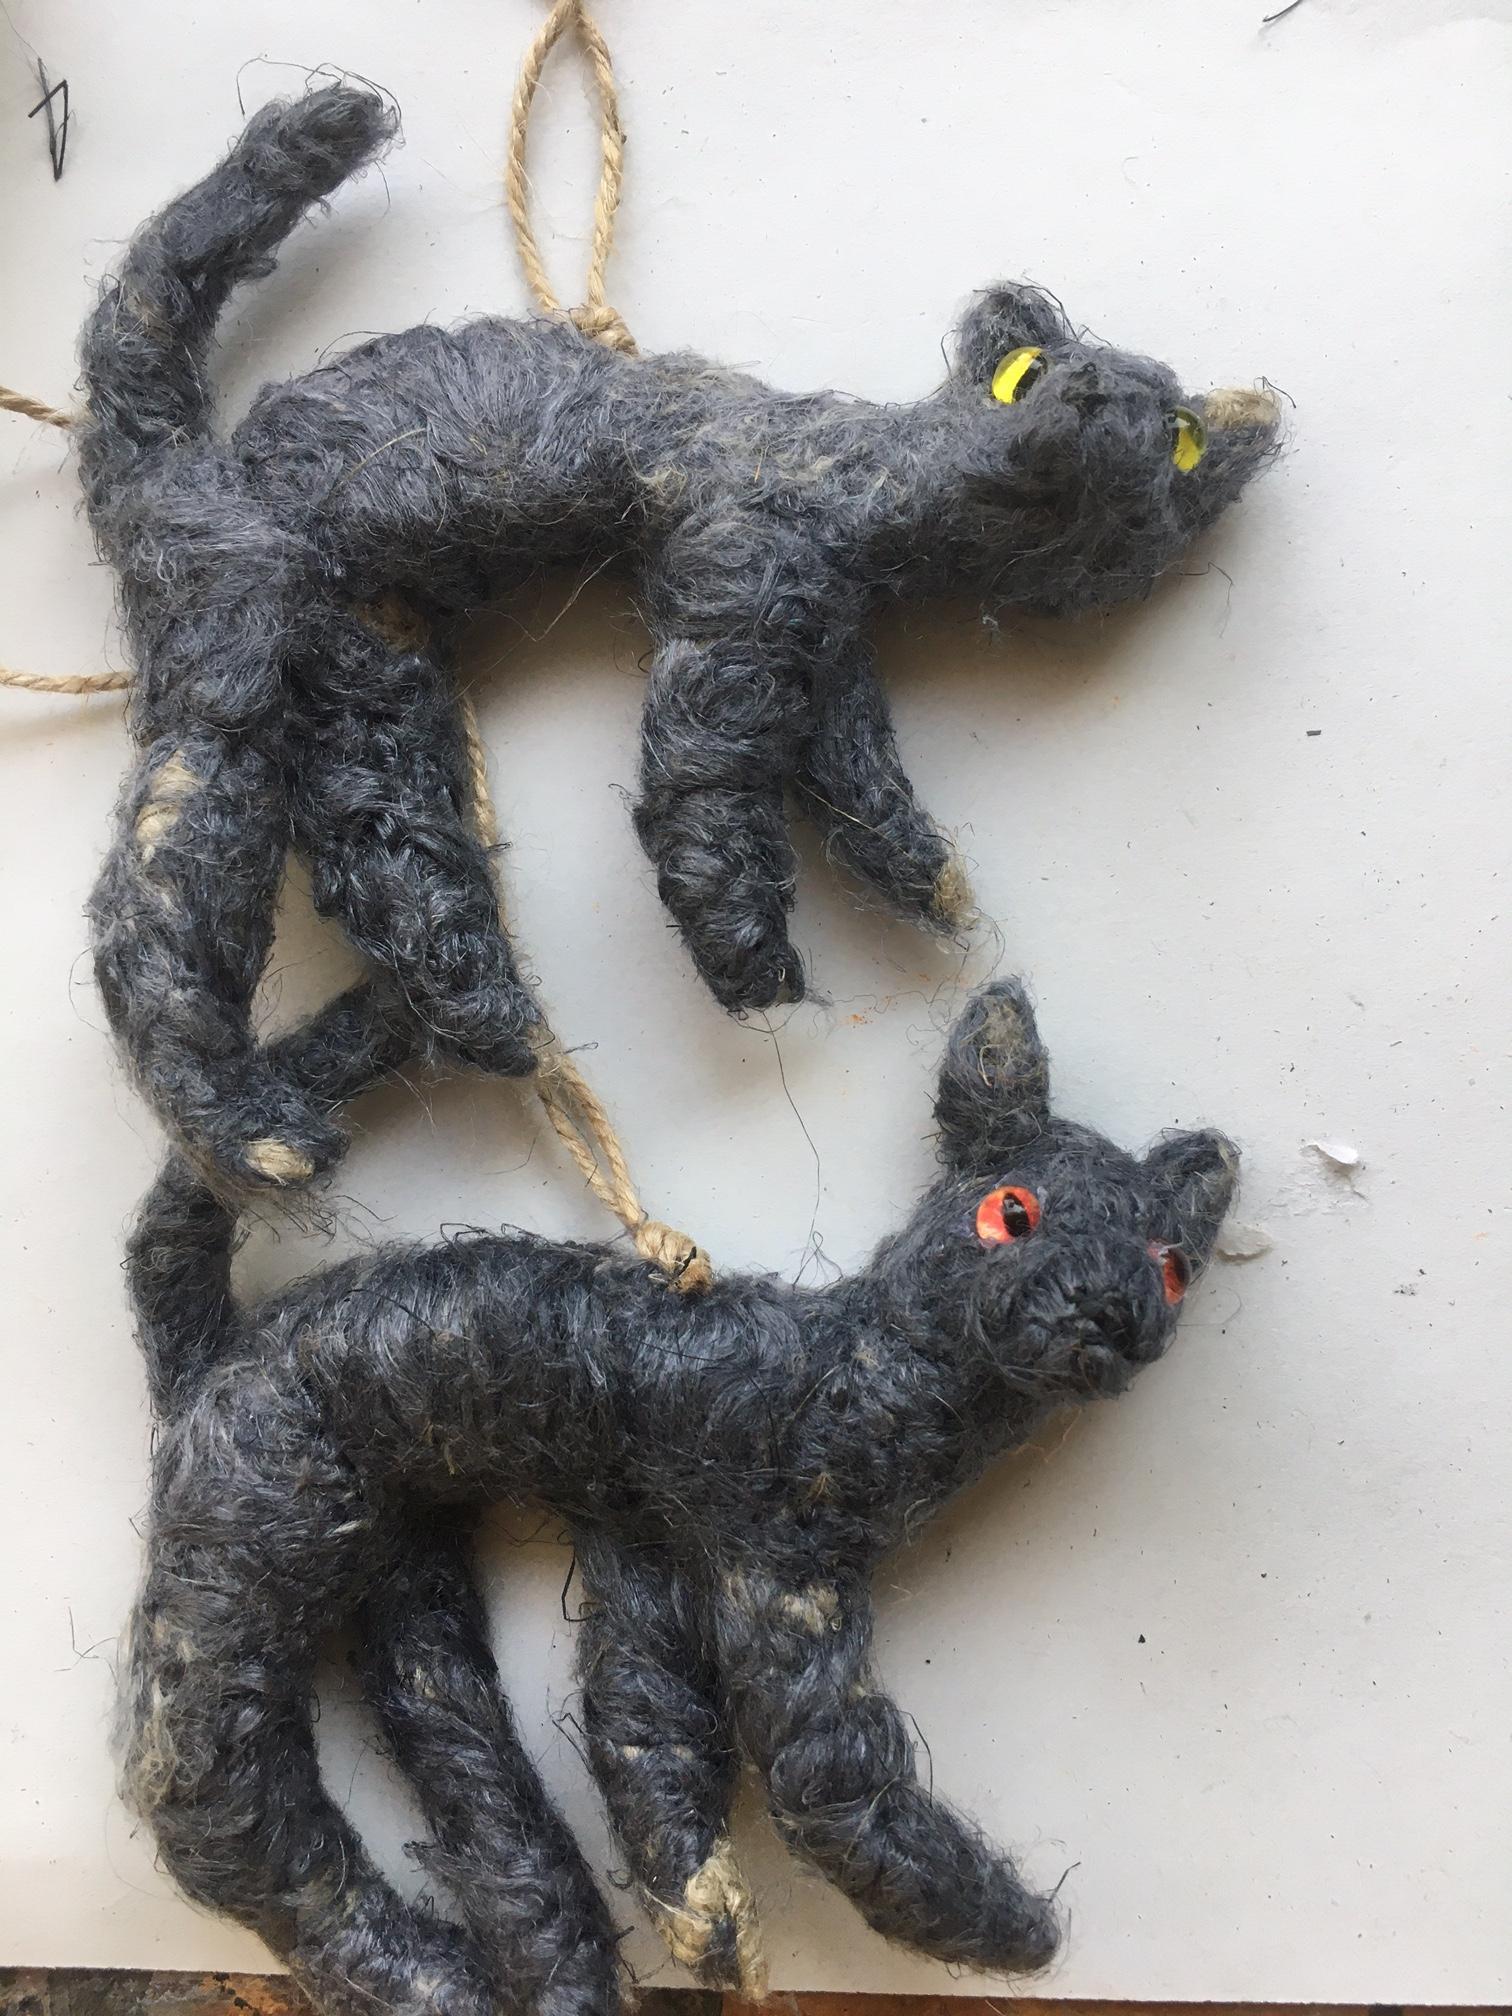 Spooked blue Persian cat. Needle-felted flax ornaments.